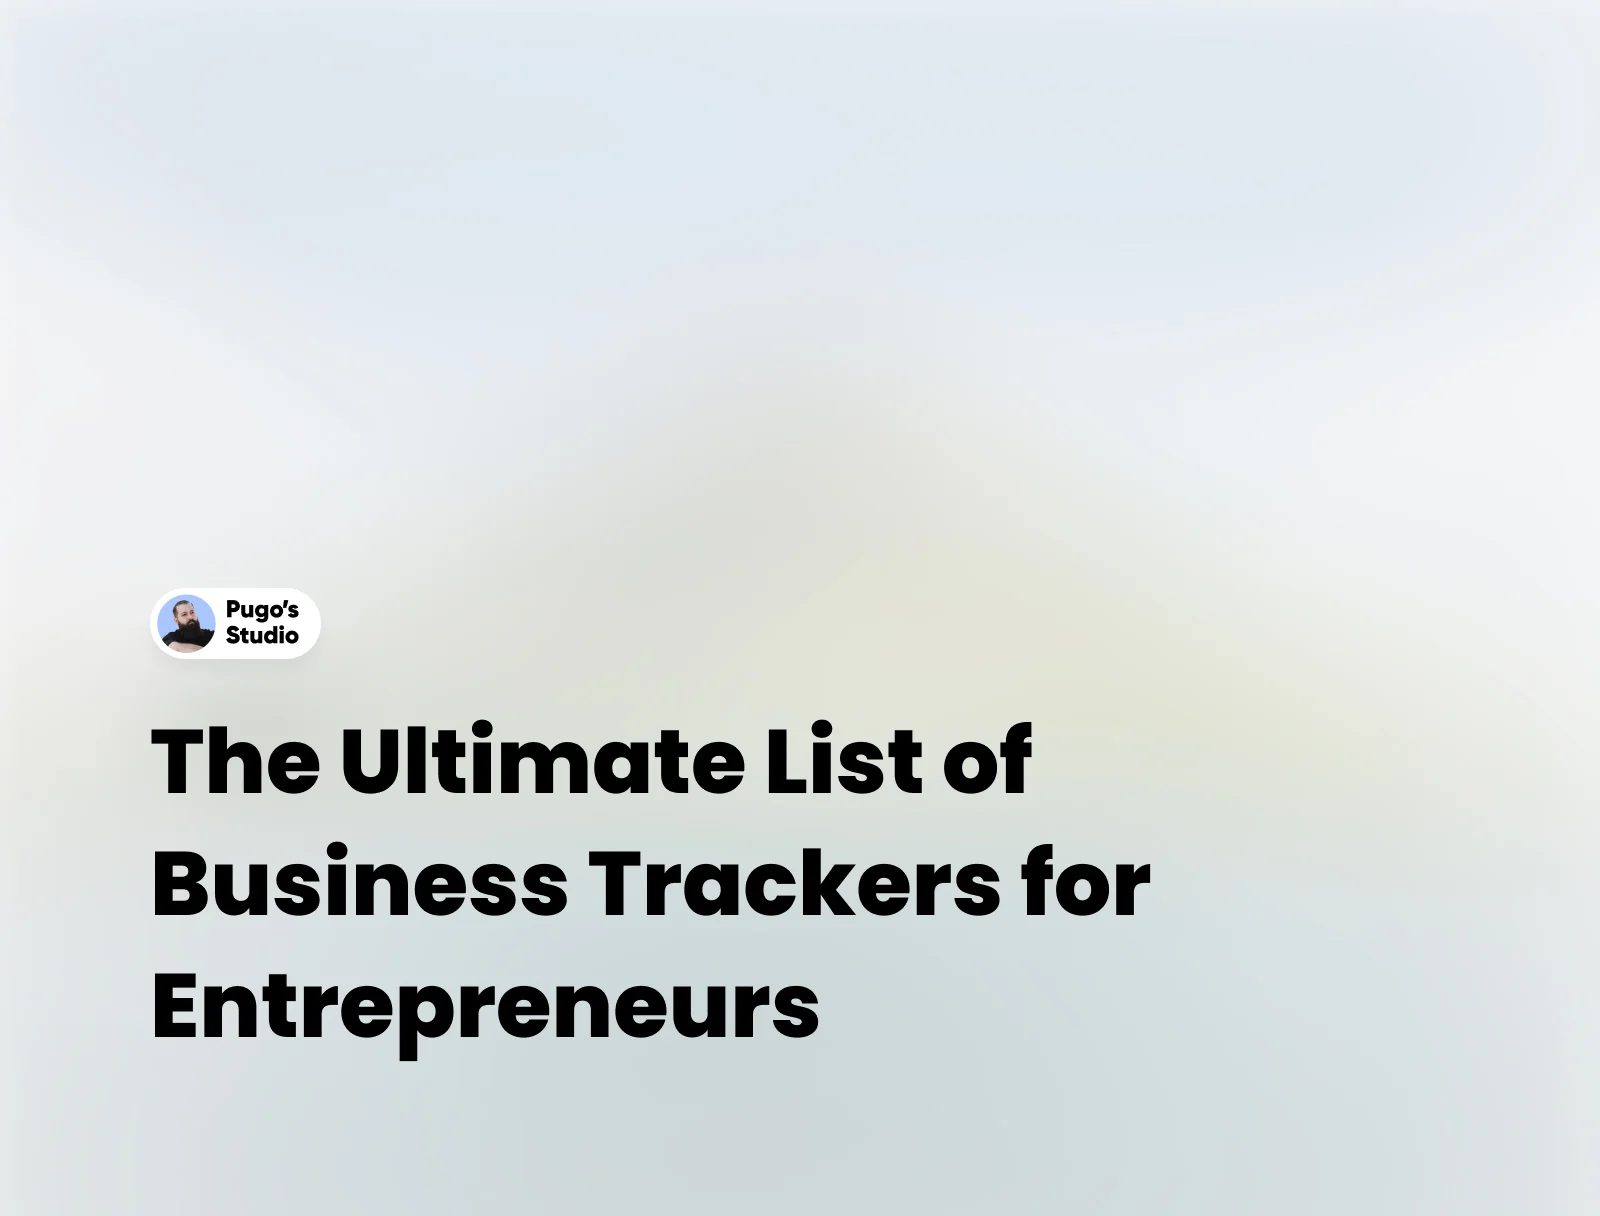 The Ultimate List of Business Trackers You Need!